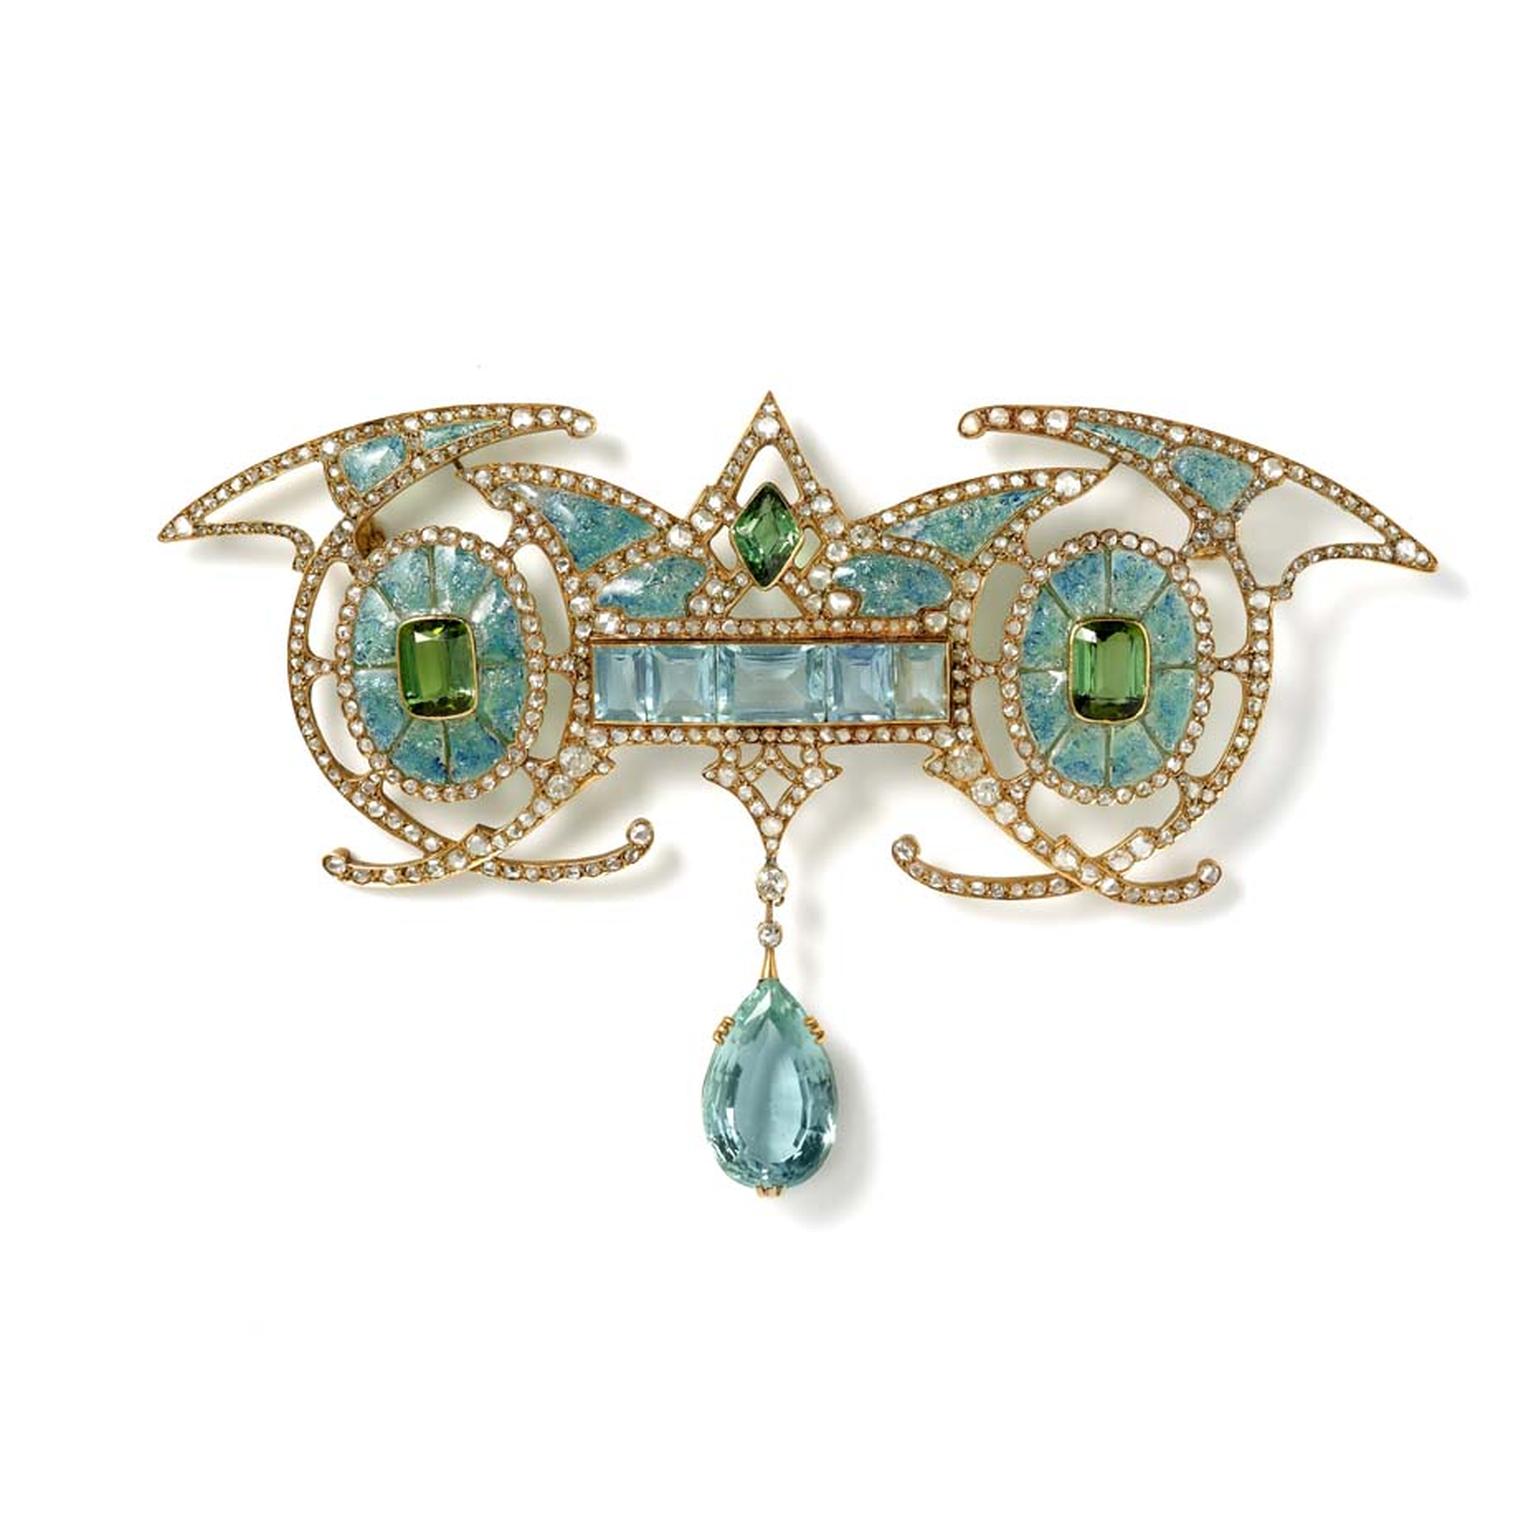 Art Nouveau yellow gold brooch designed with a central aquamarine panel carrying an aquamarine drop in between two green tourmalines within enamelled ovals with diamonds, by Georges Fouquet, Paris. Exhibited by Hancocks.